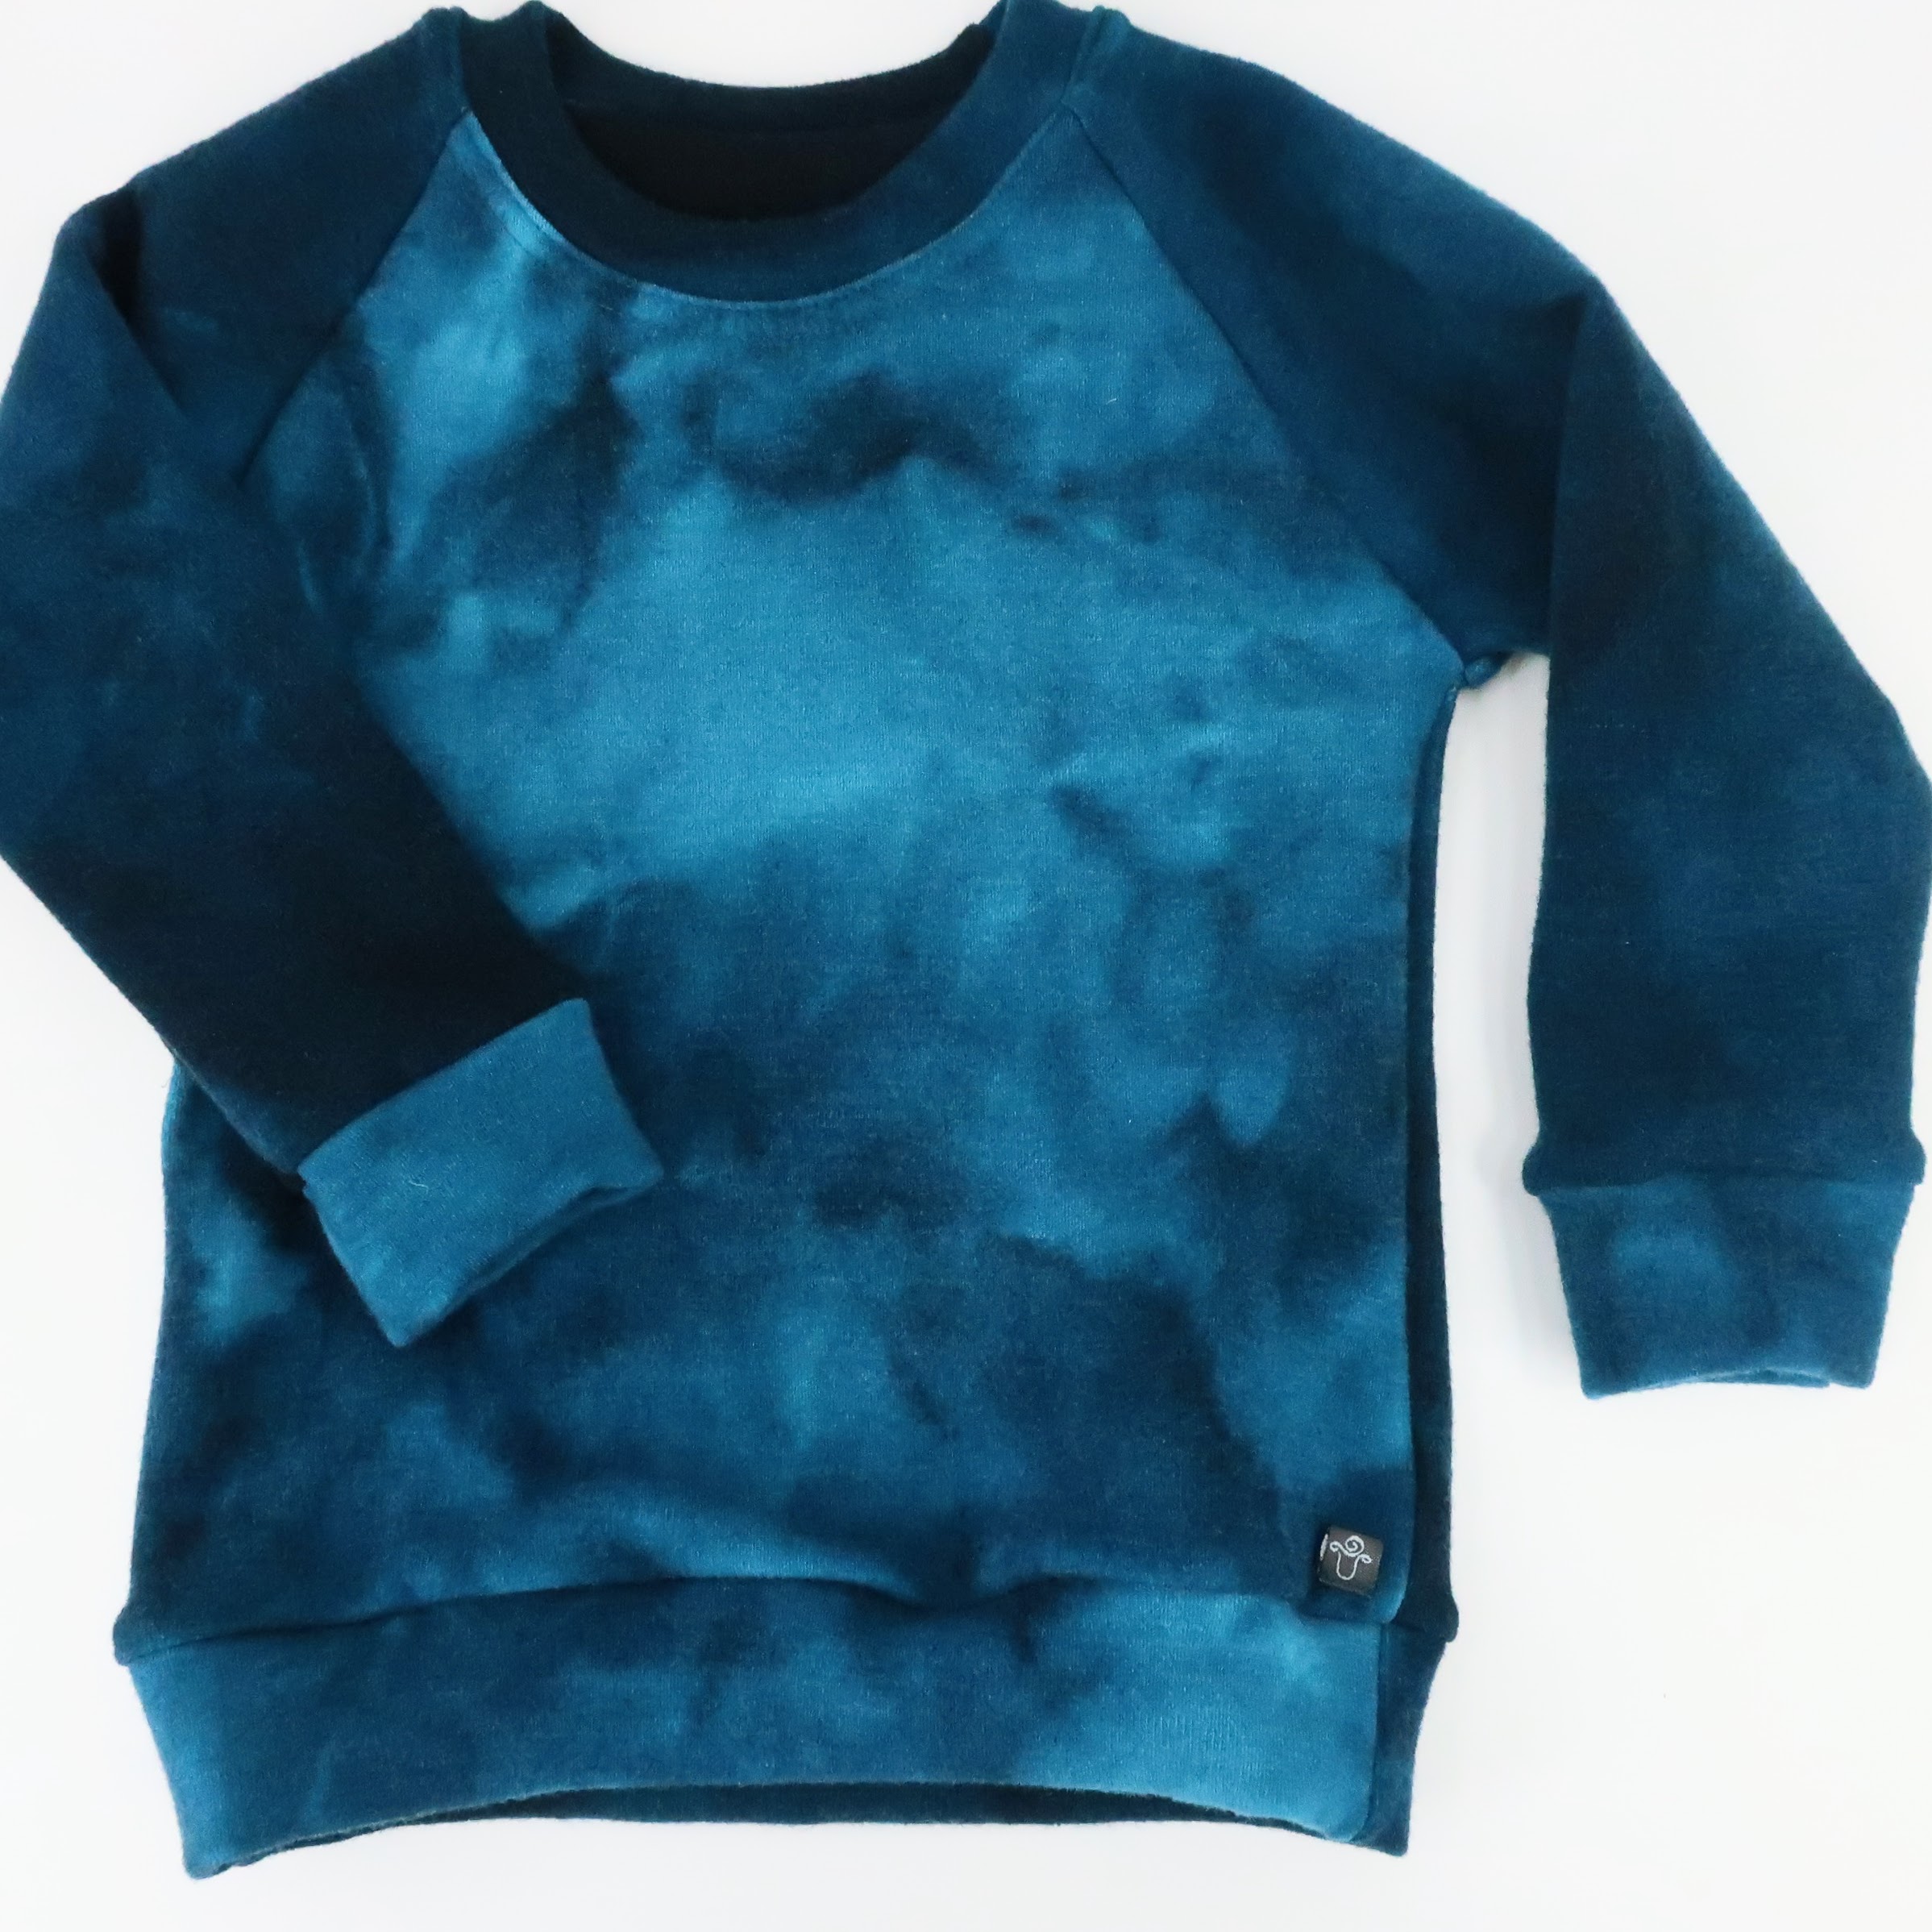 Merino Wool Simple Crew Neck Sweater. With cuffed raglan sleeves and a classic rounded crew neck. This sweater is a tie dyed blues colour.